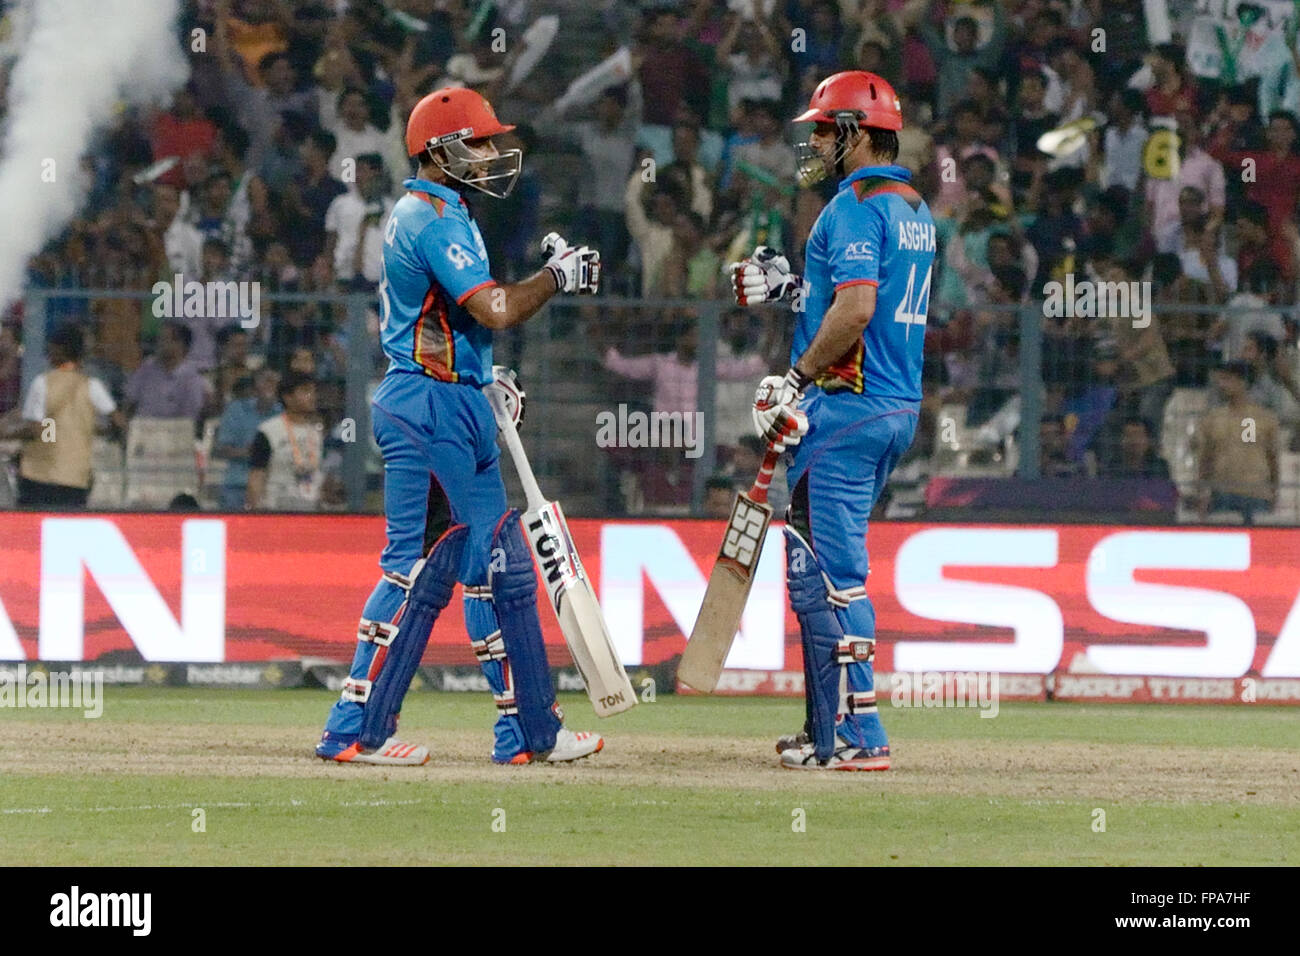 Kolkata, India. 17th Mar, 2016. Sri Lanka won ICC World Cup T20 Super 10 match by six wickets with seven balls to remains against Afghanistan at Eden Garden. Dilshan hit unbeaten 83 bring win for the Sri Lanka. Afghanistan batted first and ended up at 153 runs, Asghar Stanikzai score 62 for Afghanistan. © Saikat Paul/Pacific Press/Alamy Live News Stock Photo